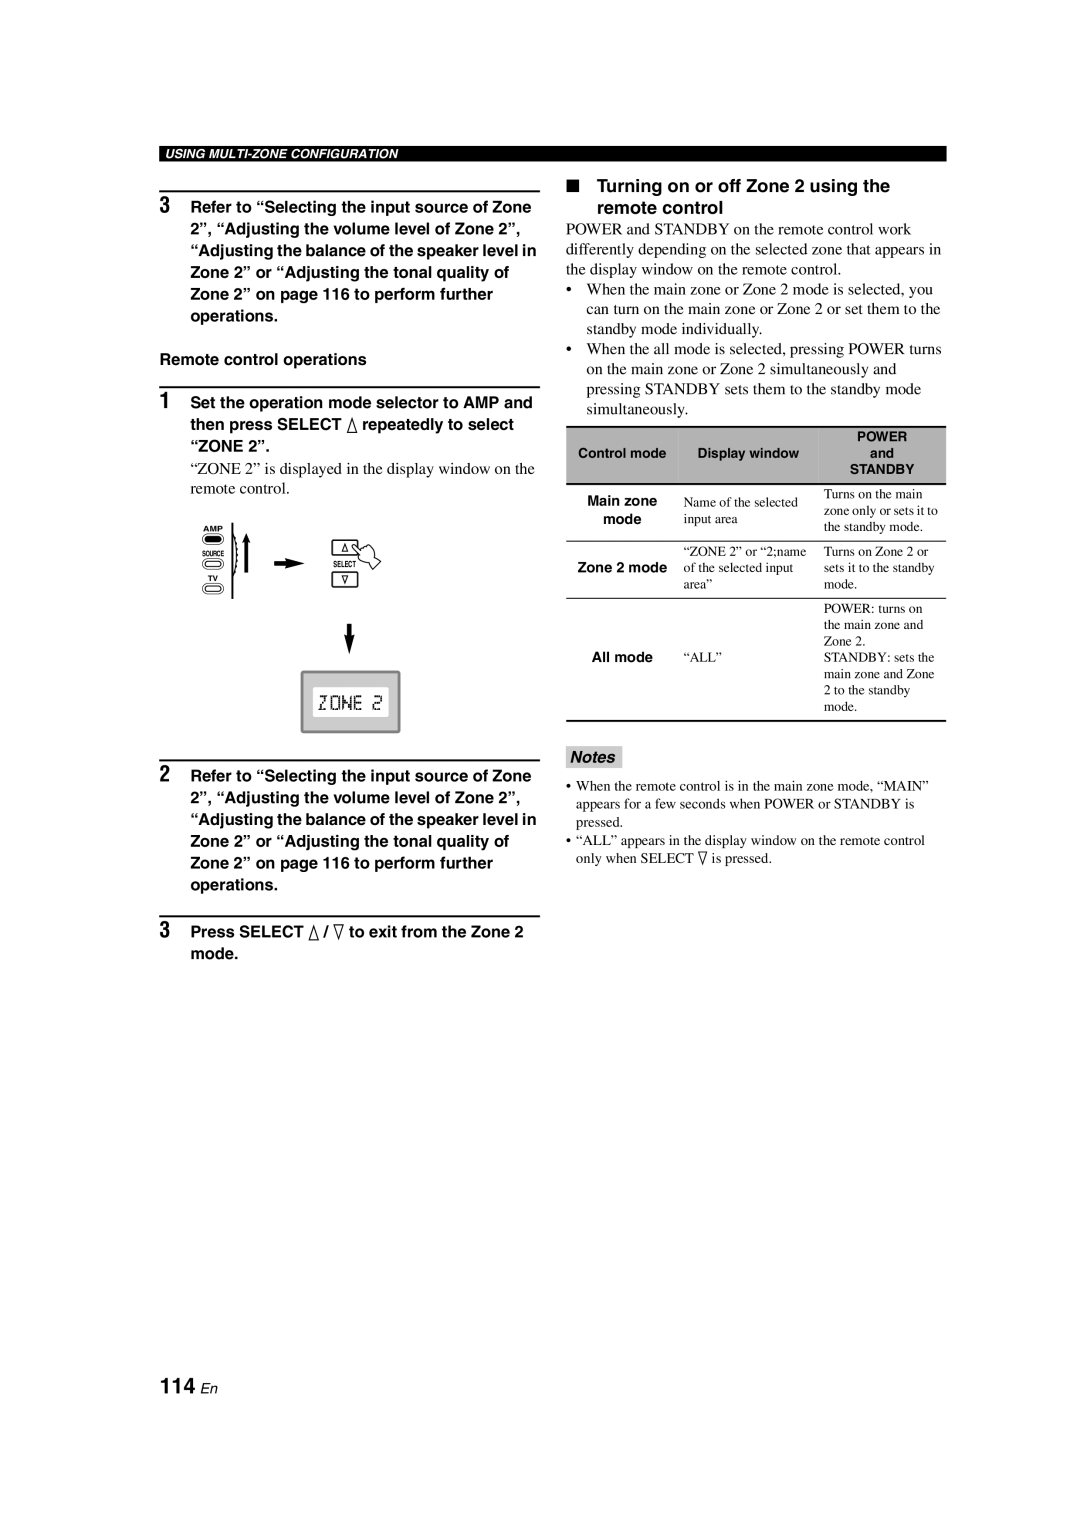 Yamaha HTR-6090 owner manual 114 En, Turning on or off Zone 2 using the remote control, Notes 